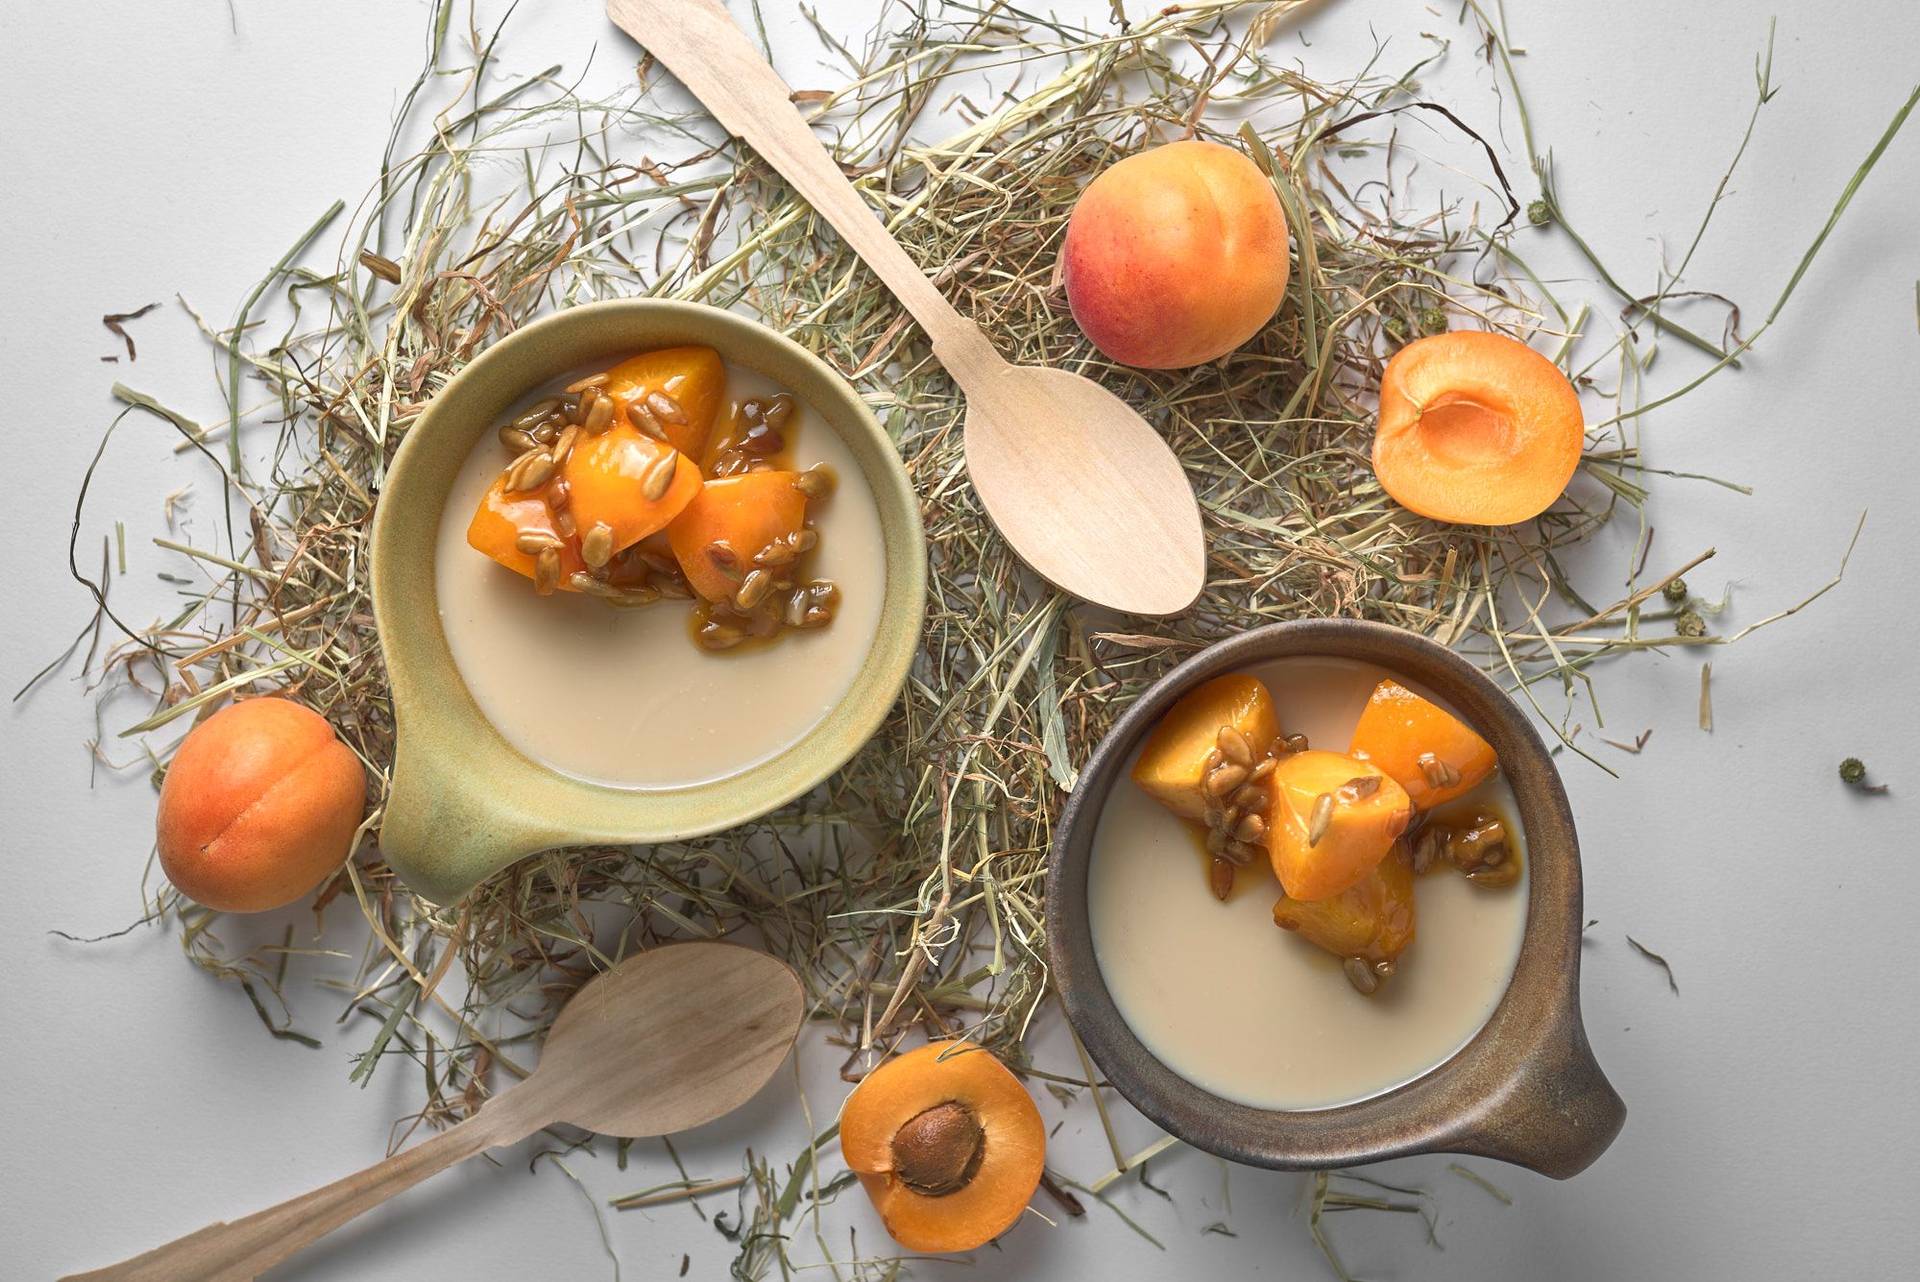 hay panna cotta with caramelized apricots and sunflower seeds on white background